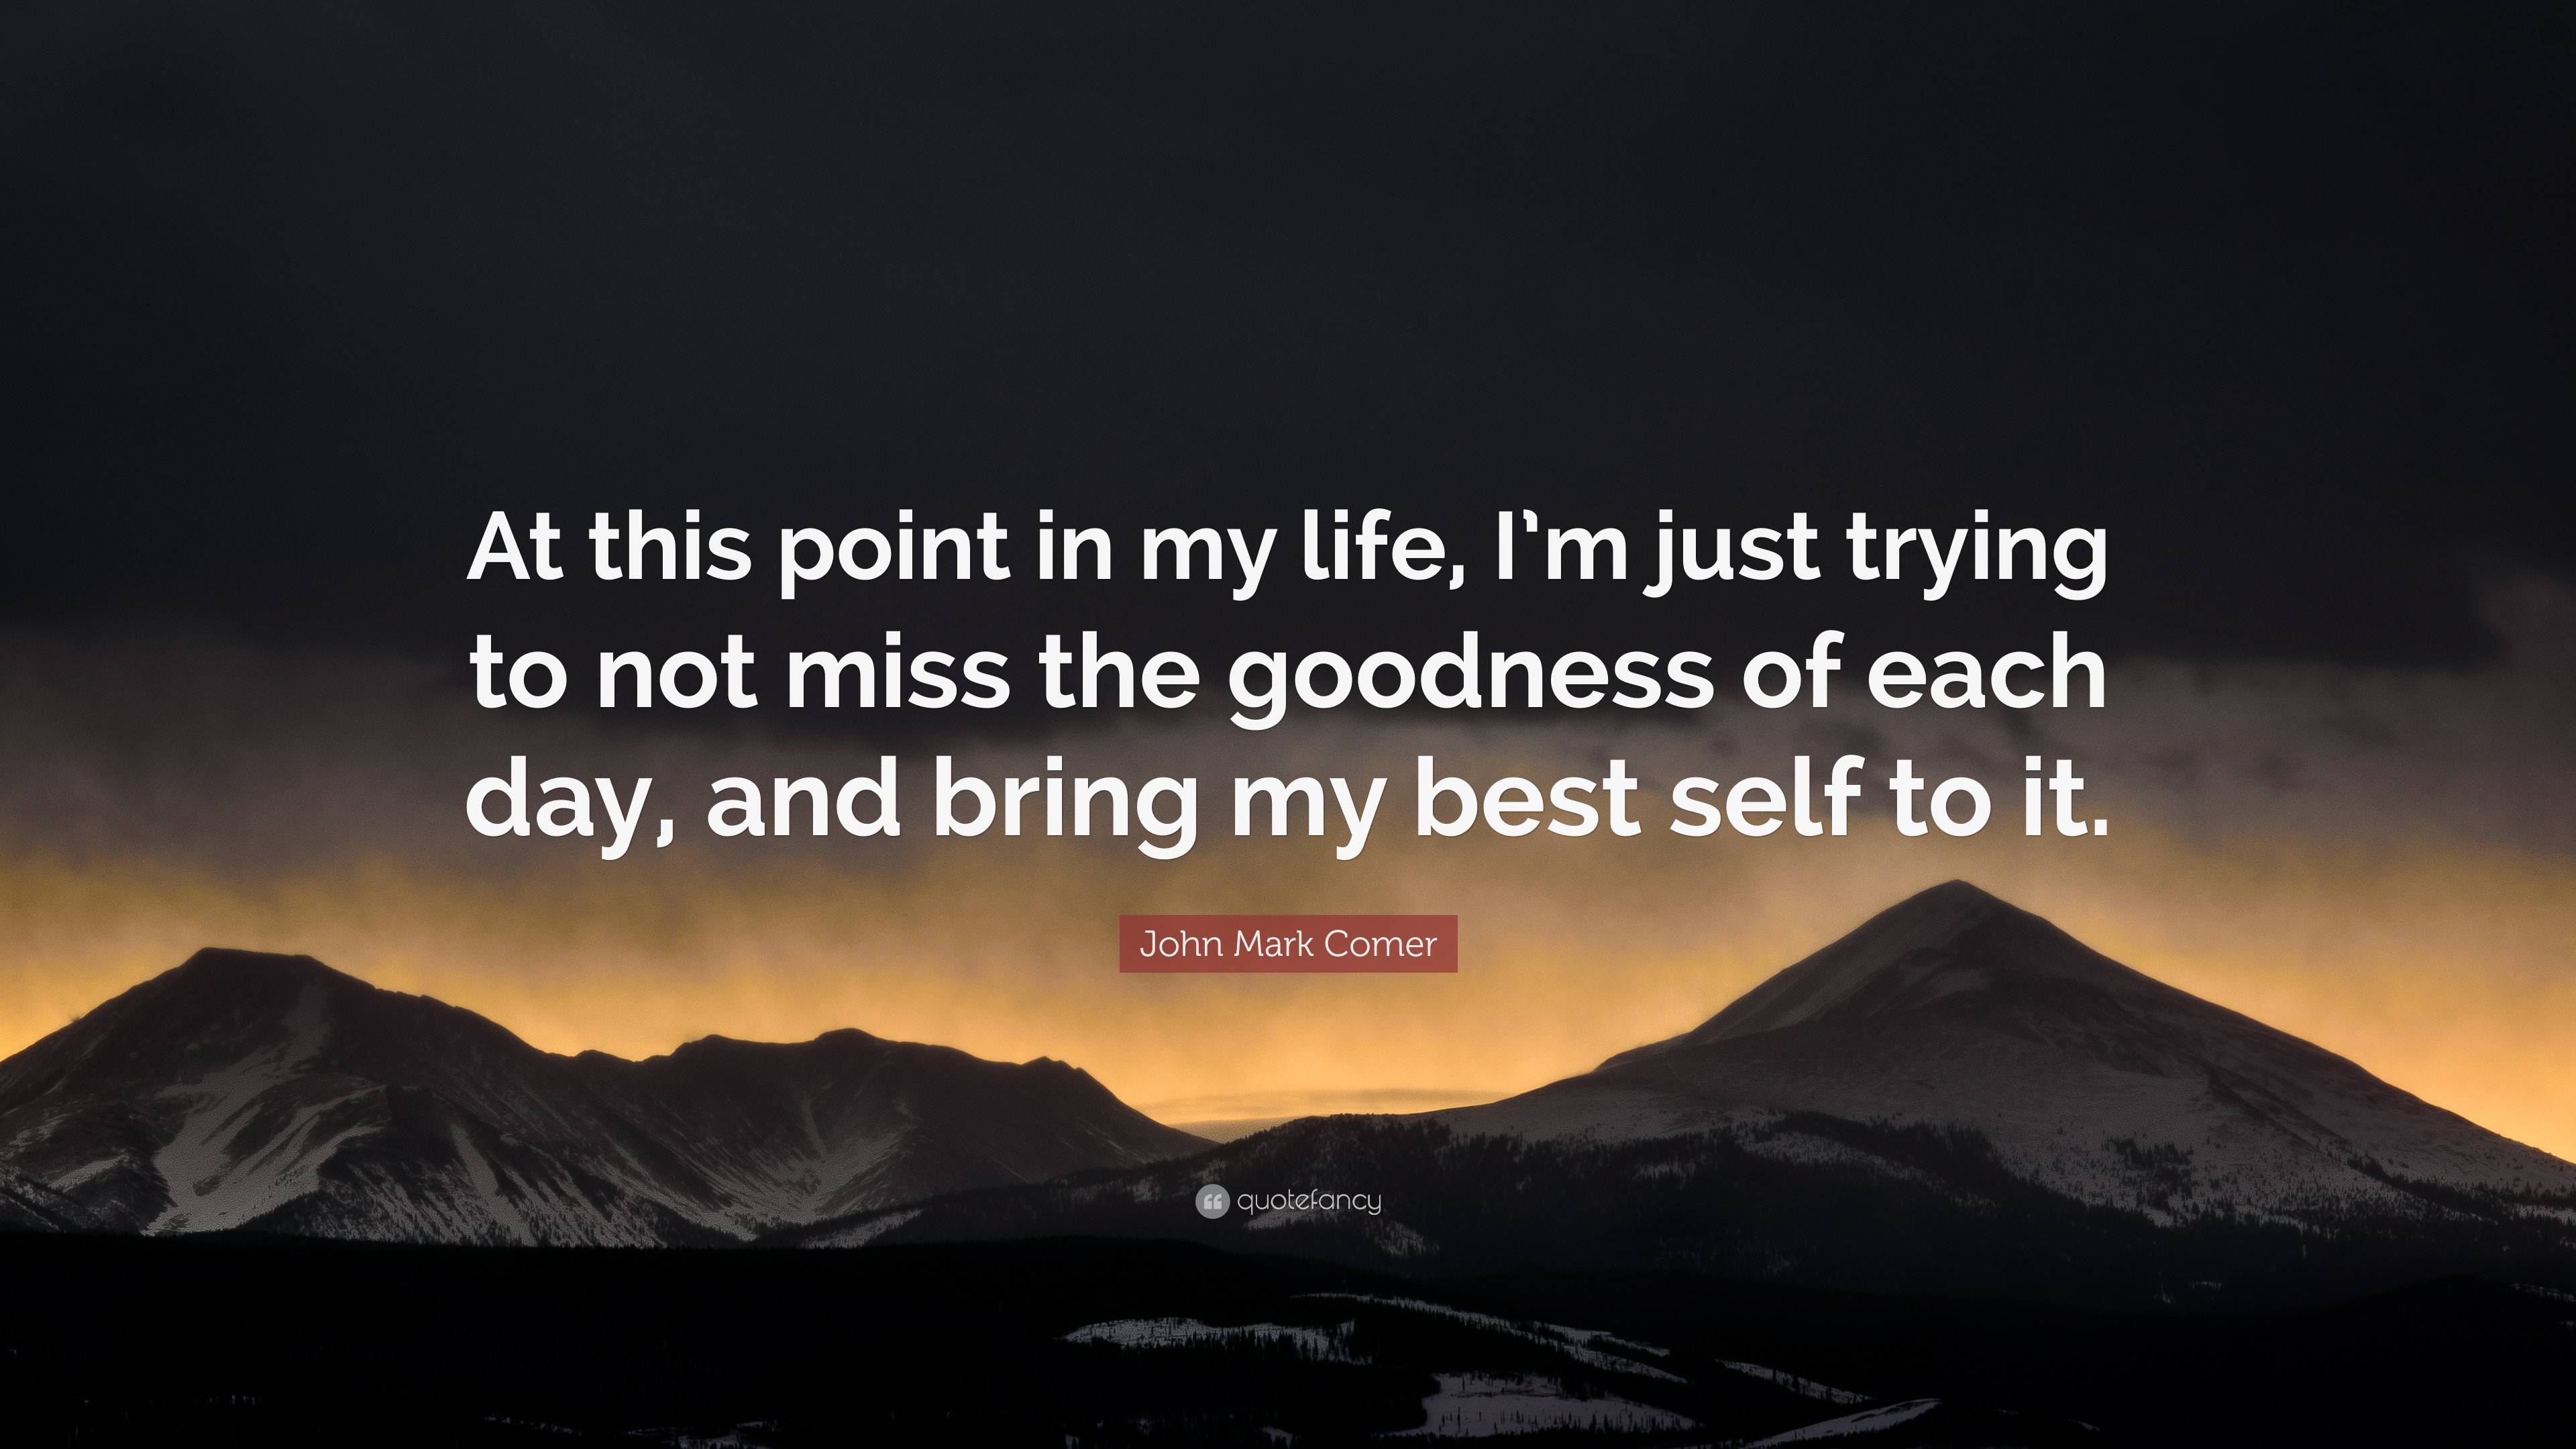 John Mark Comer Quote: “At this point in my life, I’m just trying to ...